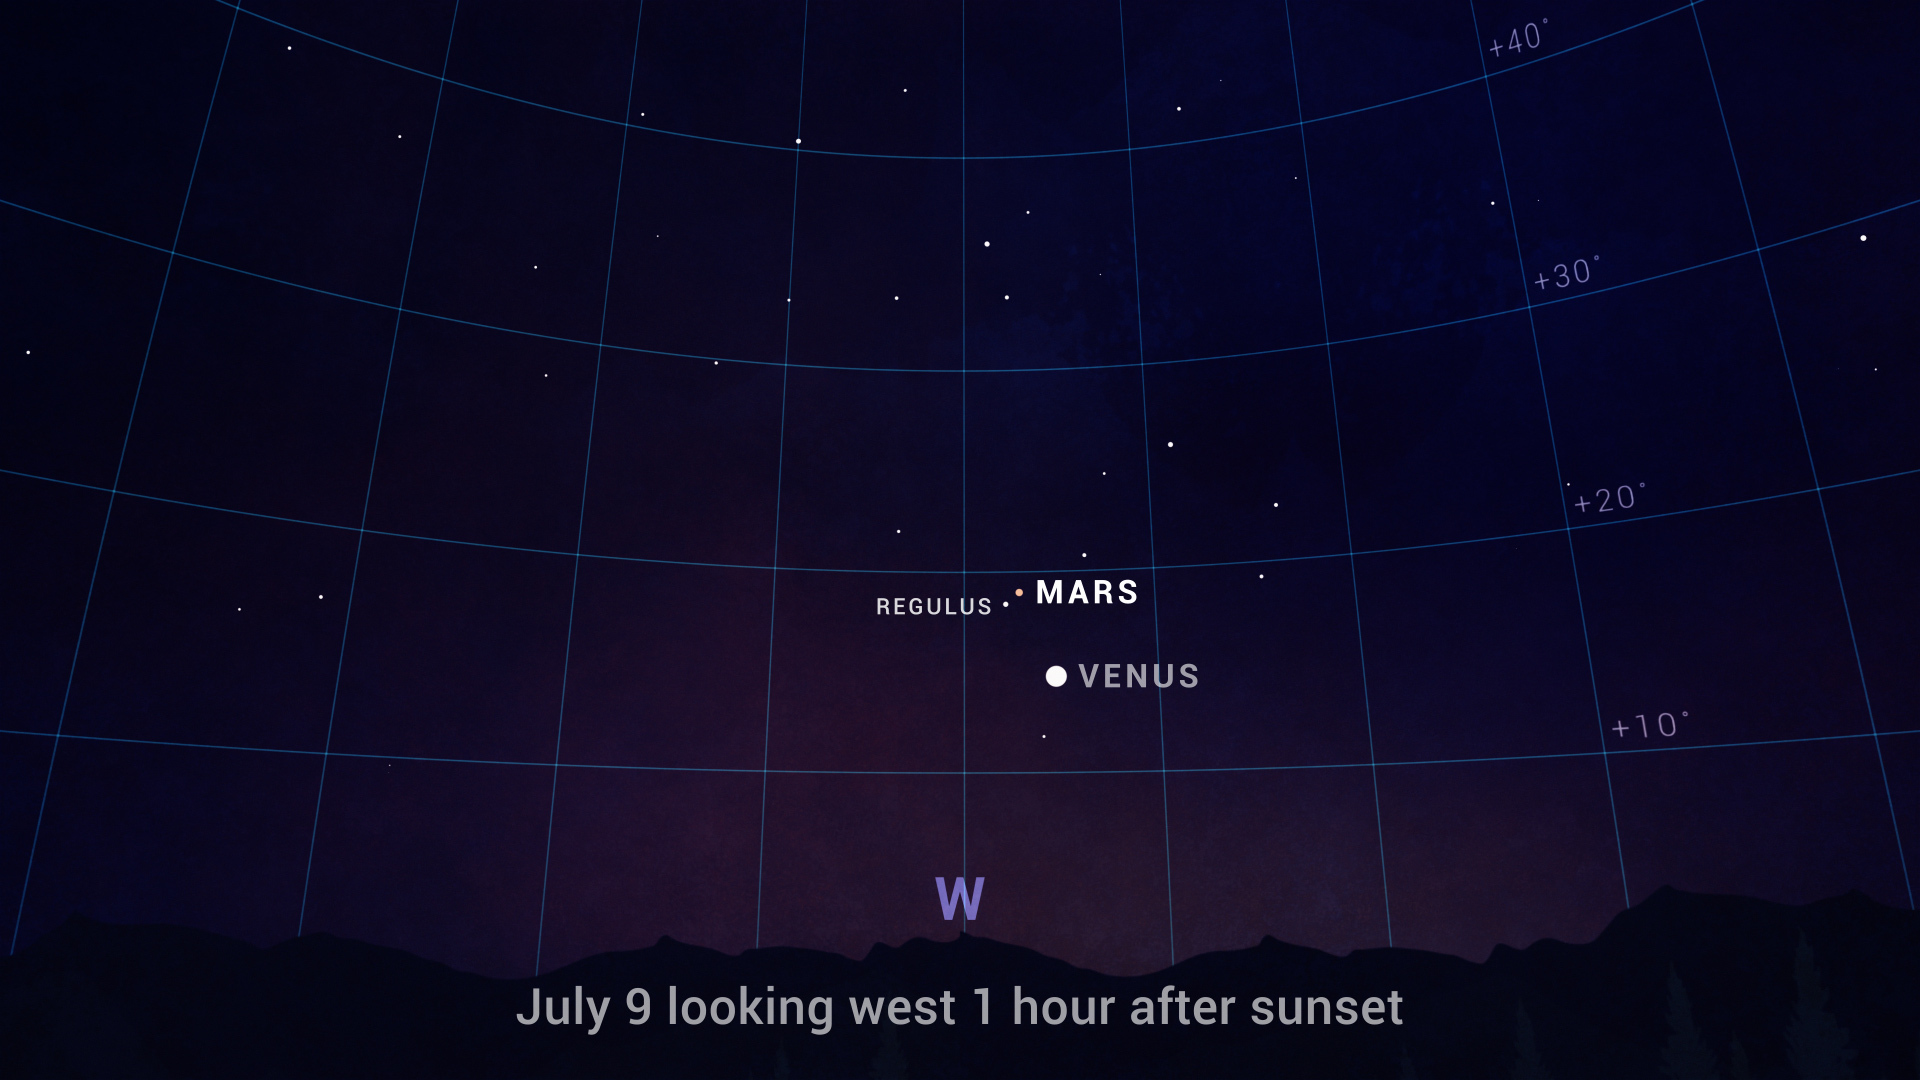 An illustrated sky chart shows the evening sky facing west, one hour after sunset on July 9. The locations of planets Mars and Venus are depicted as two bright, starlike dots near center, with Venus below and slightly to the right of Mars. Very close to Mars, to its lower left, is the star Regulus.